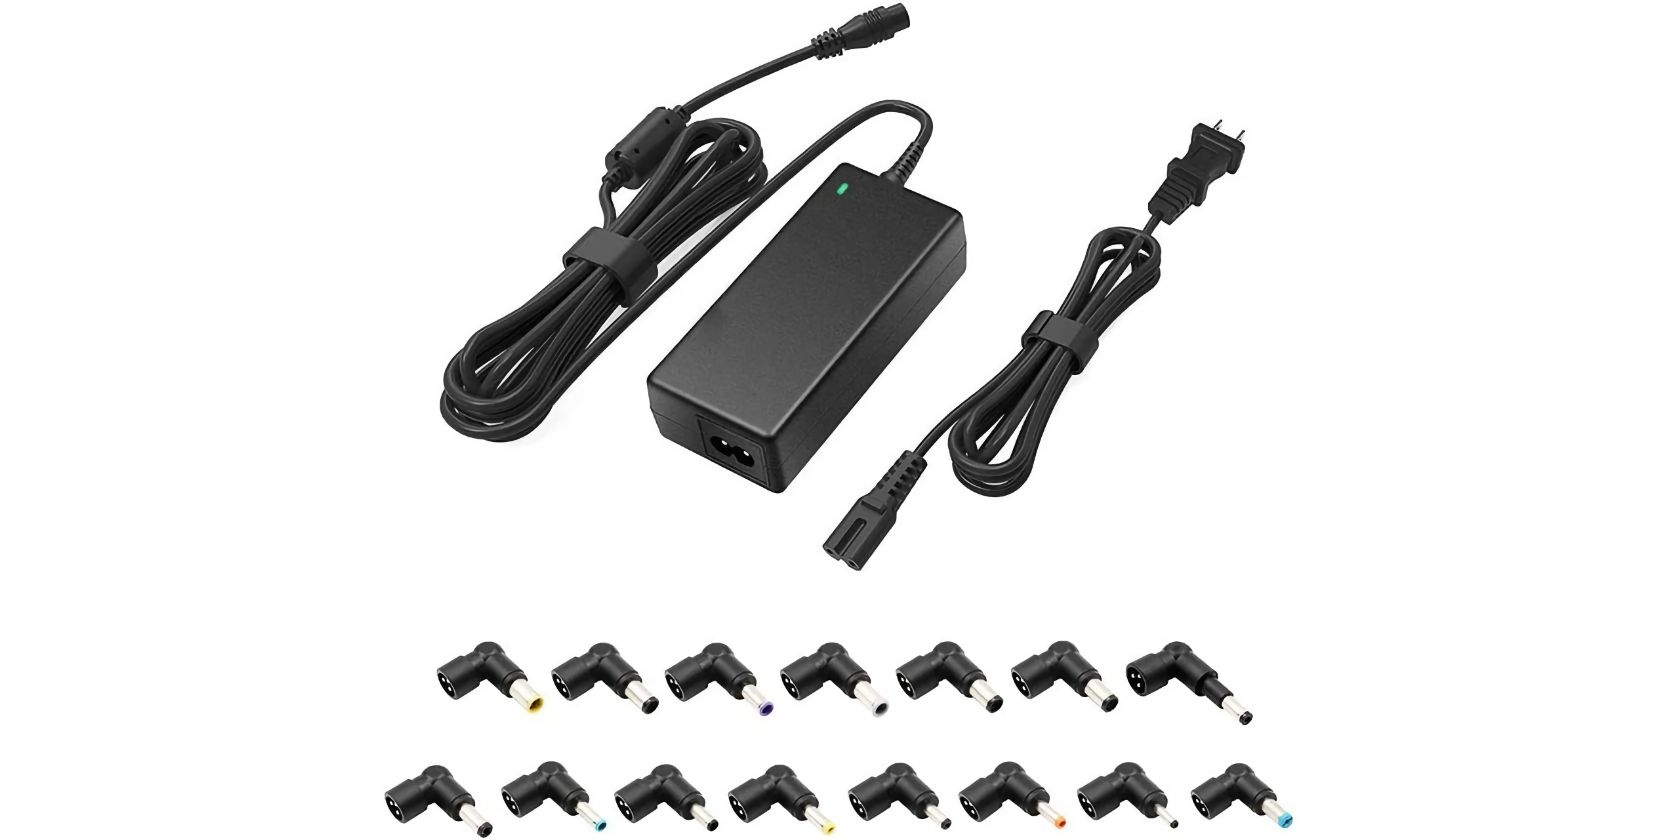 Universal power adapter with interchangeable tips